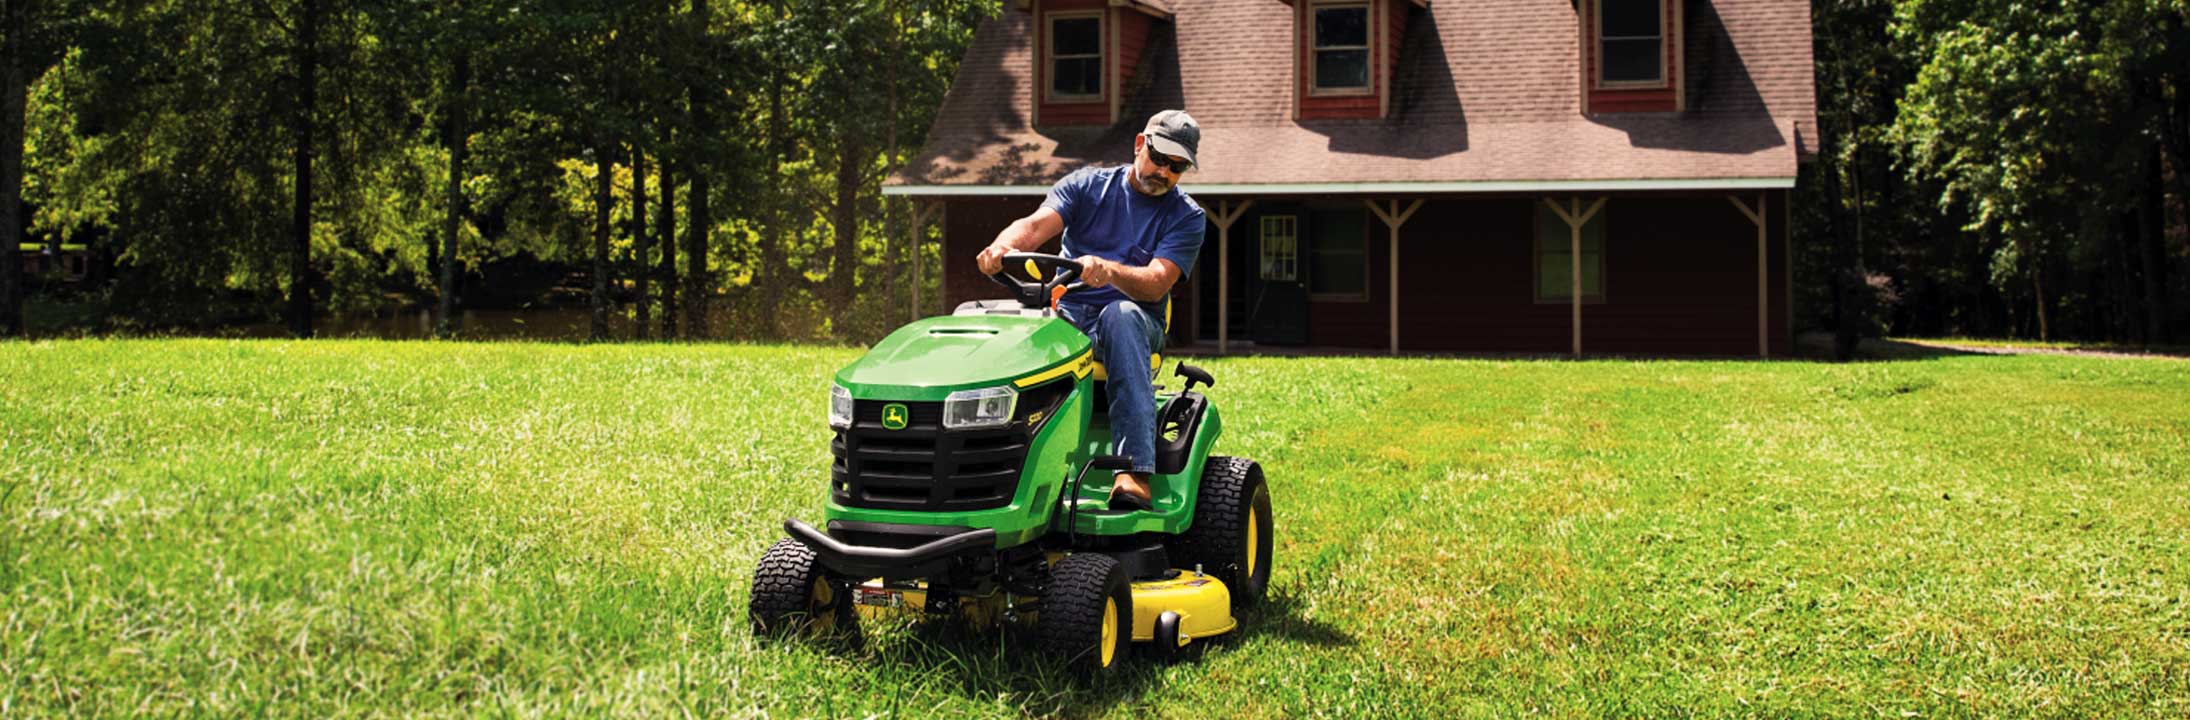 Use a riding lawn mower to groom sloped landscapes without breaking a sweat...